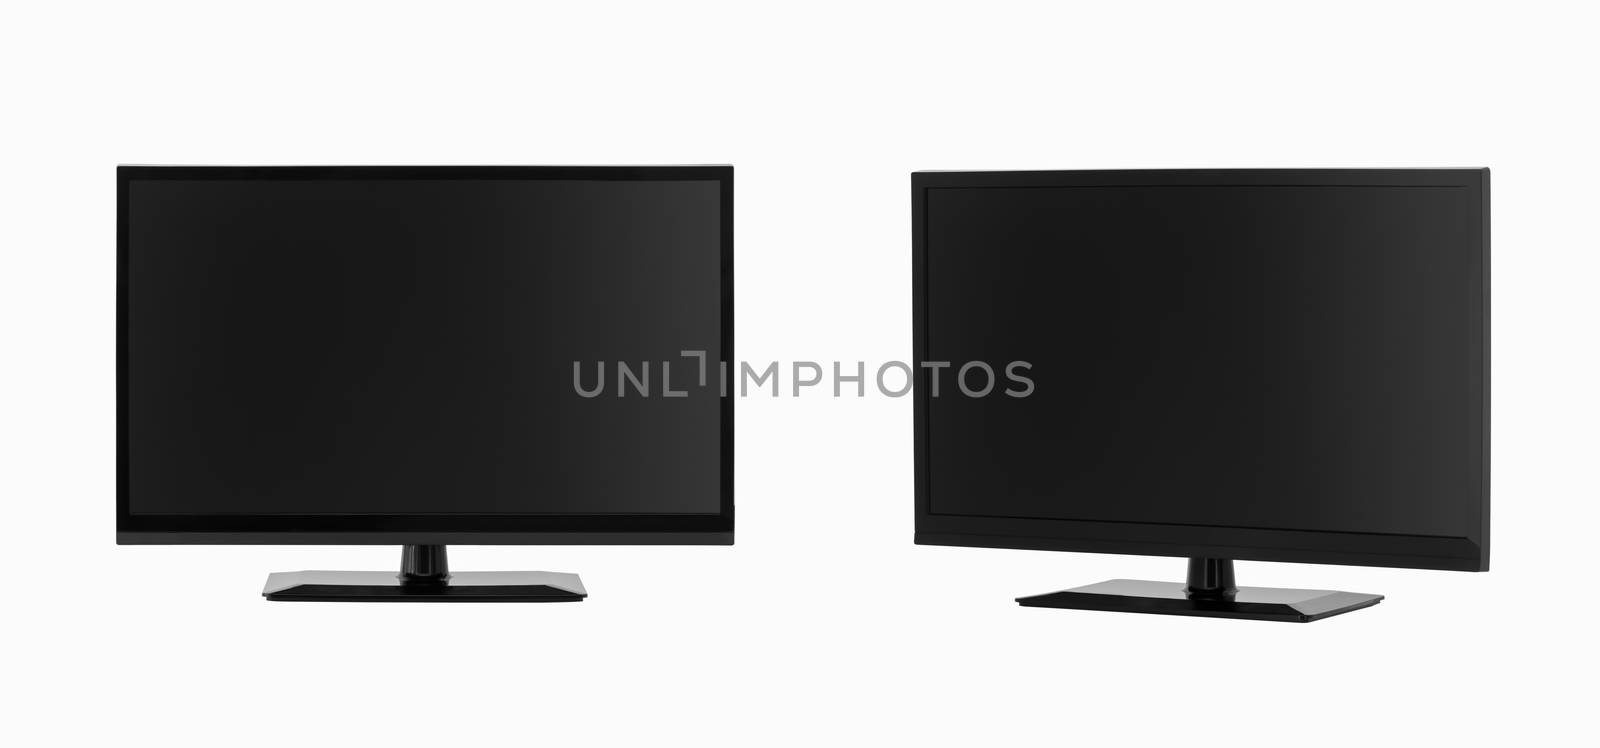 high quality LCD TV in two angles on white background